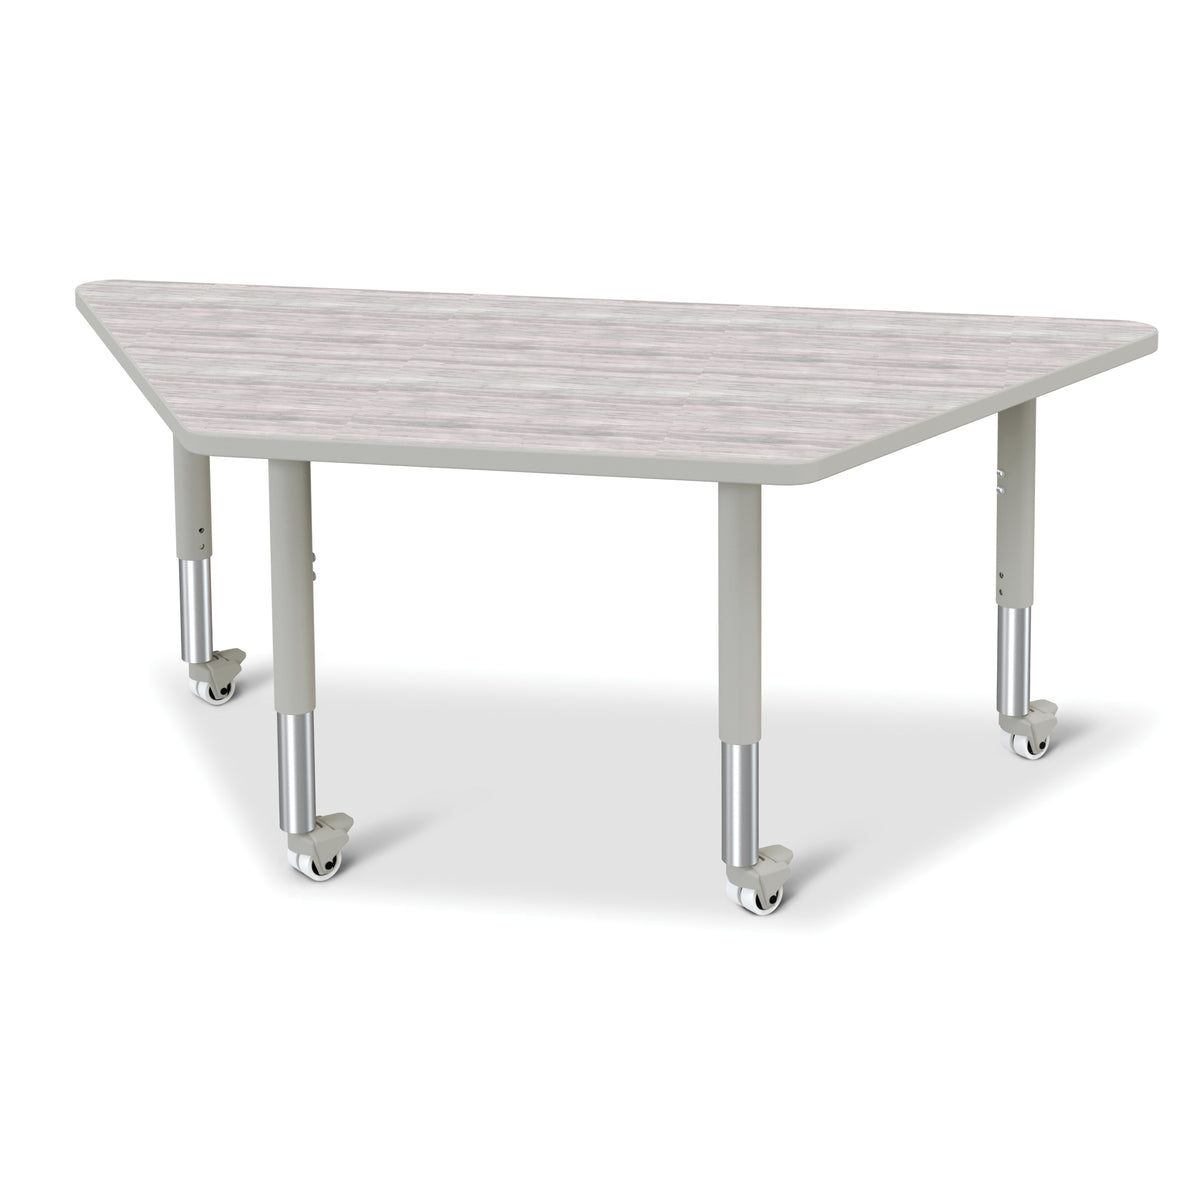 6443JCM450, Berries Trapezoid Activity Table - 30" X 60", Mobile - Driftwood Gray/Gray/Gray